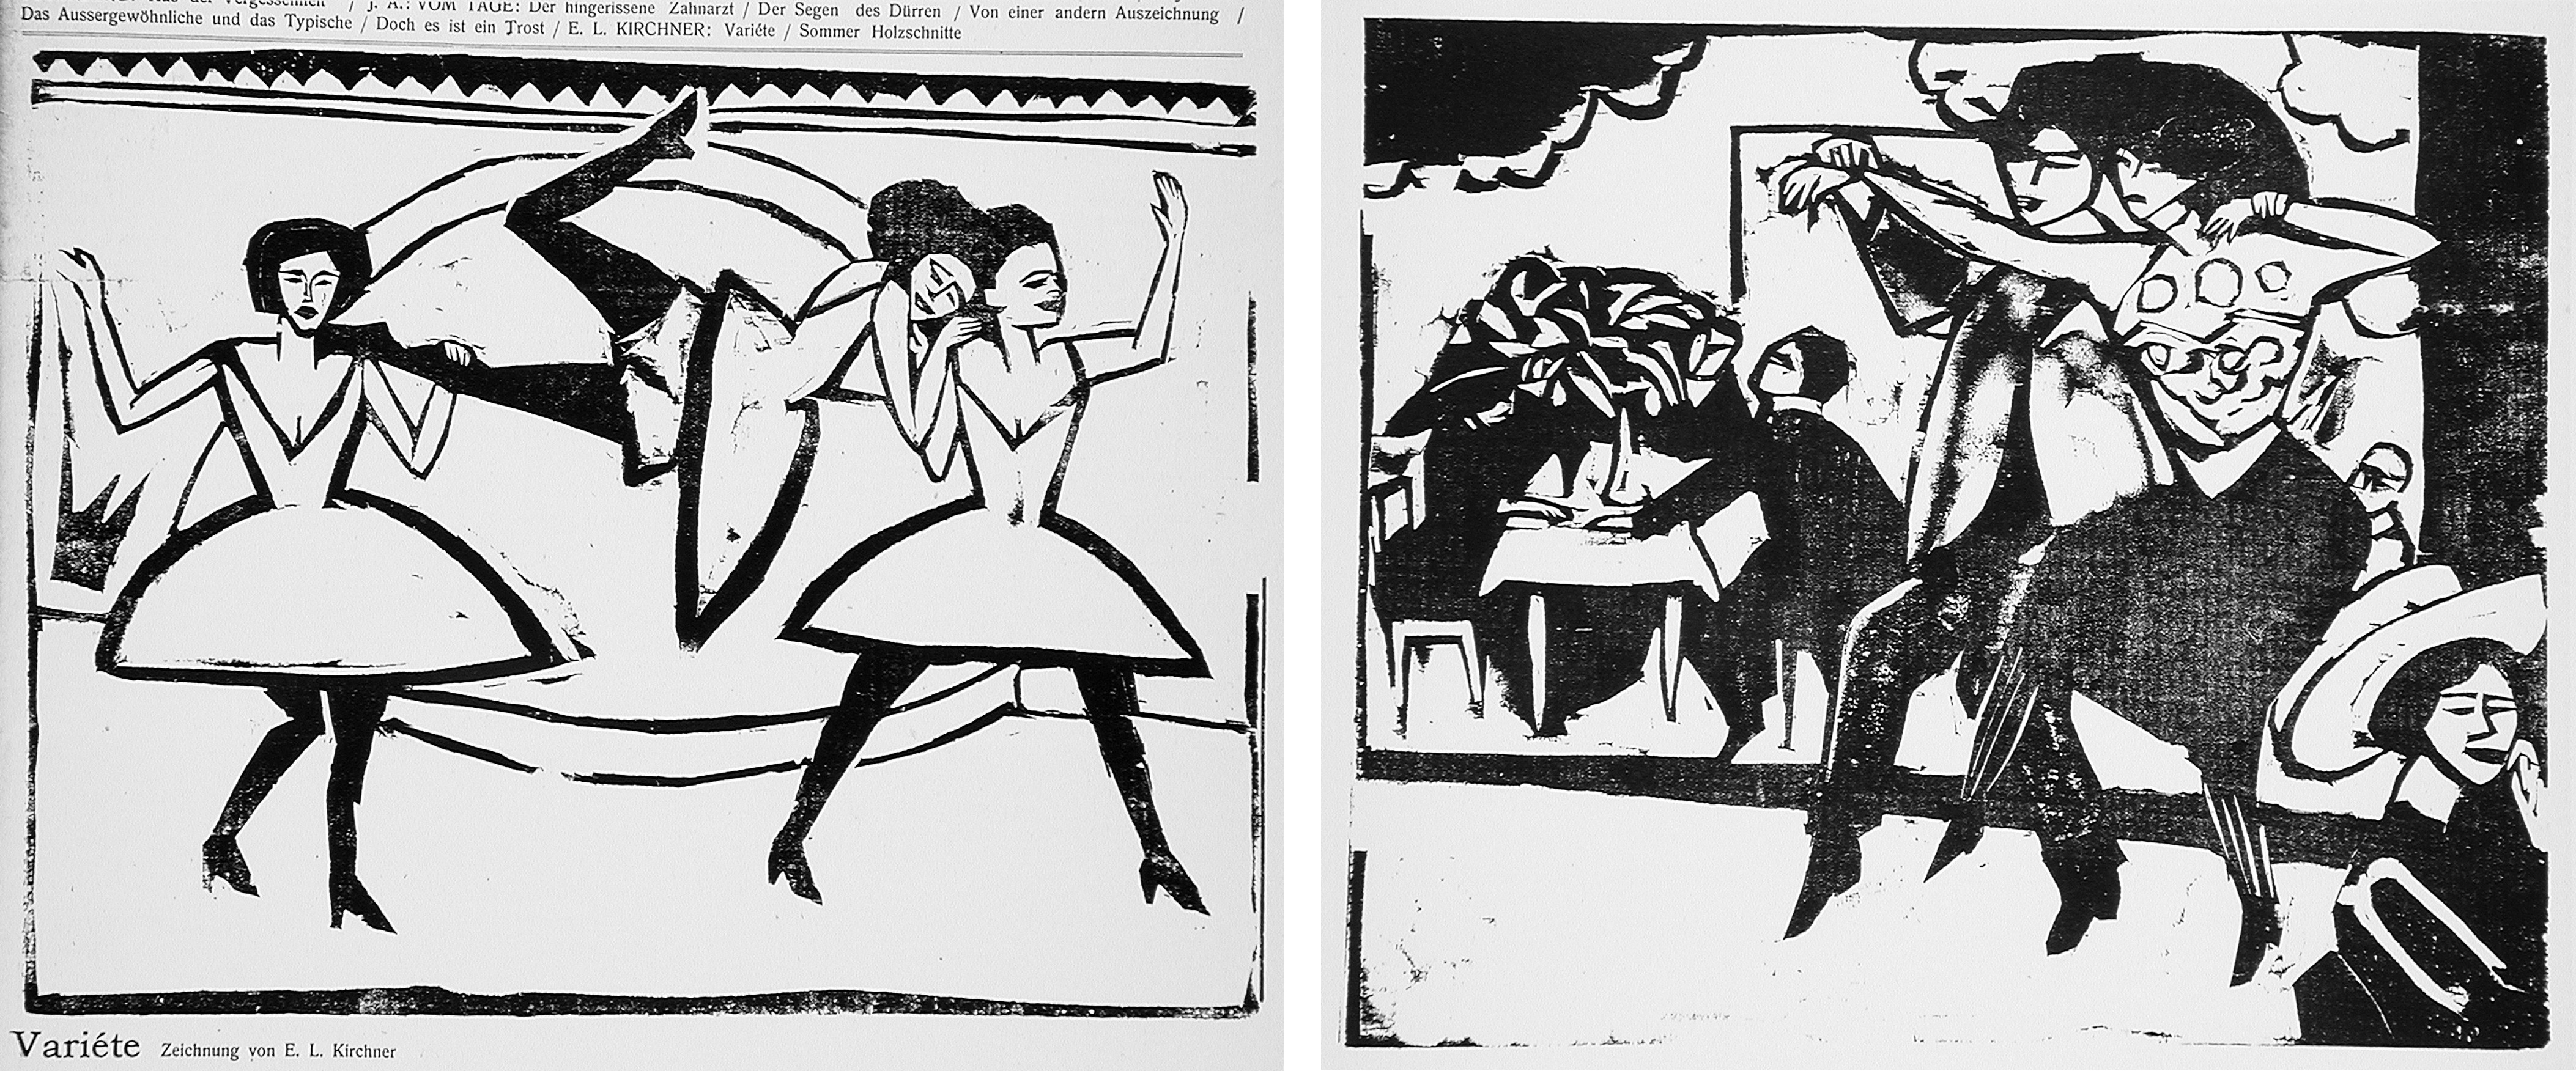 (Both images) Ernst Ludwig Kirchner, Dance hall, 1911, Los Angeles County Museum of Art, The Robert Gore Rifkind Center for German Expressionist Studies, purchased with funds provided by Anna Bing Arnold, Museum Associates Acquisition Fund, and deaccession funds, photo © Museum Associates/LACMA